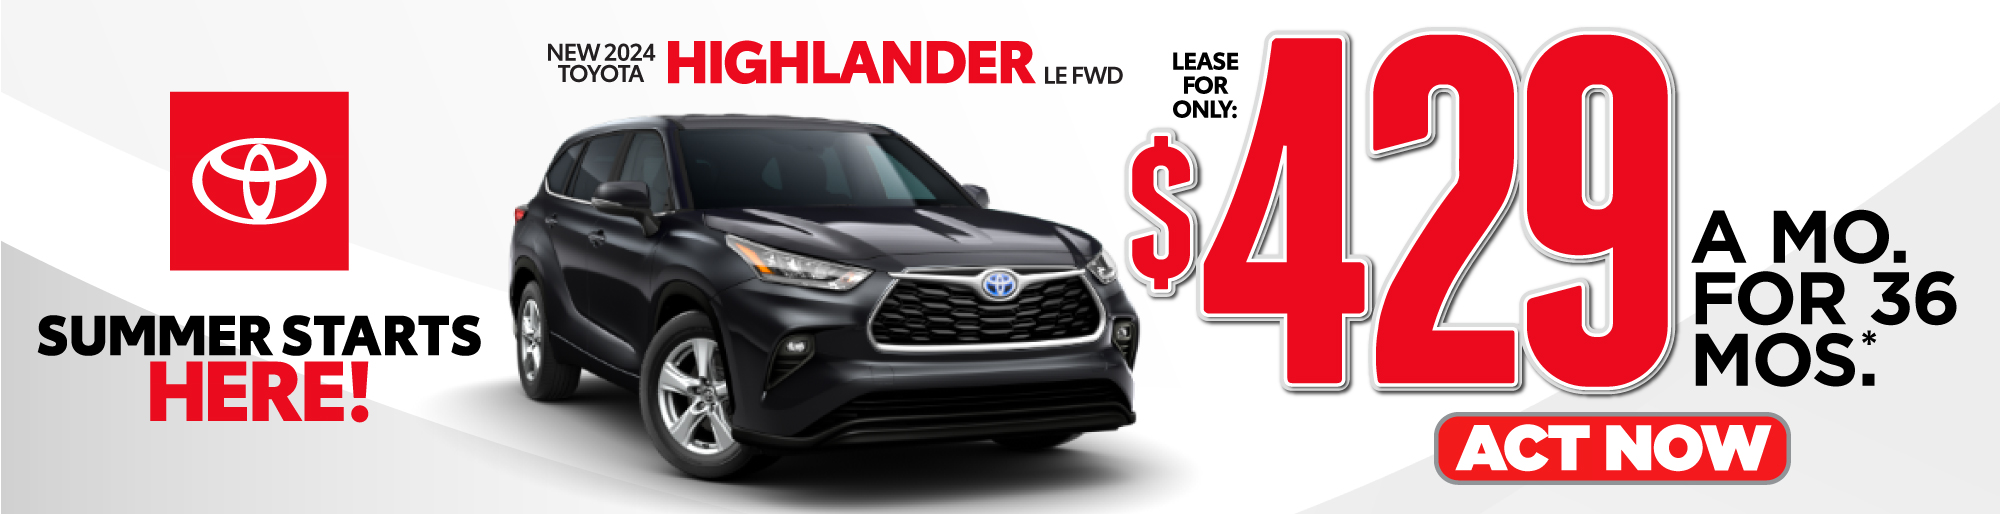 New 2022 Toyota Highlander Lease for only $349/mo.* ACT NOW